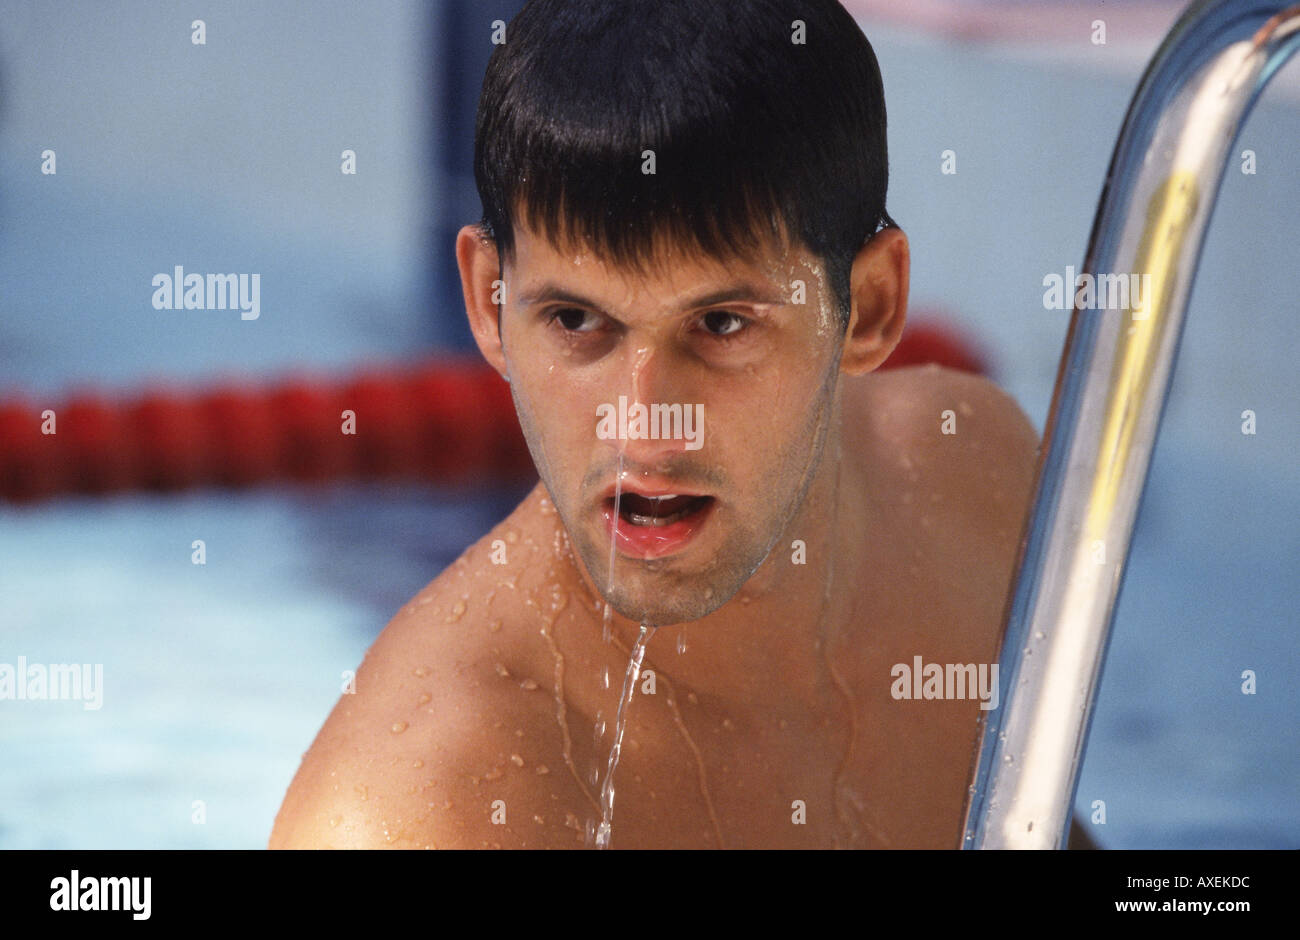 Save preview image - man-male-age-30-35-dark-haired-slim-fit-wet-swim-look-exit-water-indoor-AXEKDC